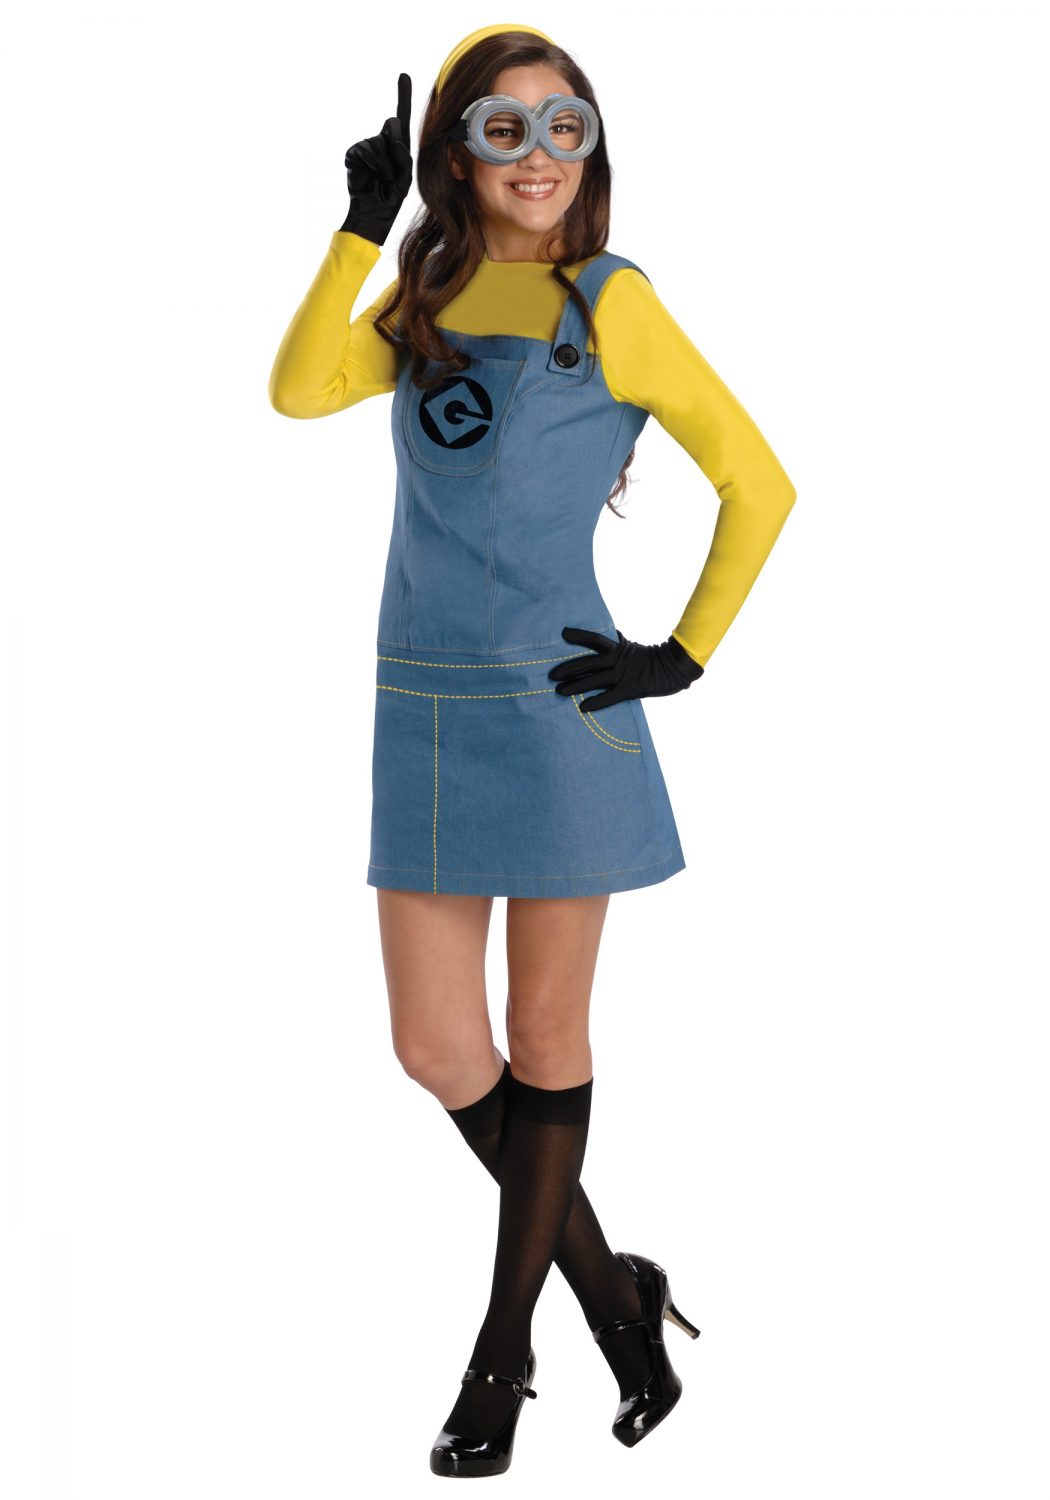 Minions2 Top 10 Teenagers Halloween Costumes Trends in 2021